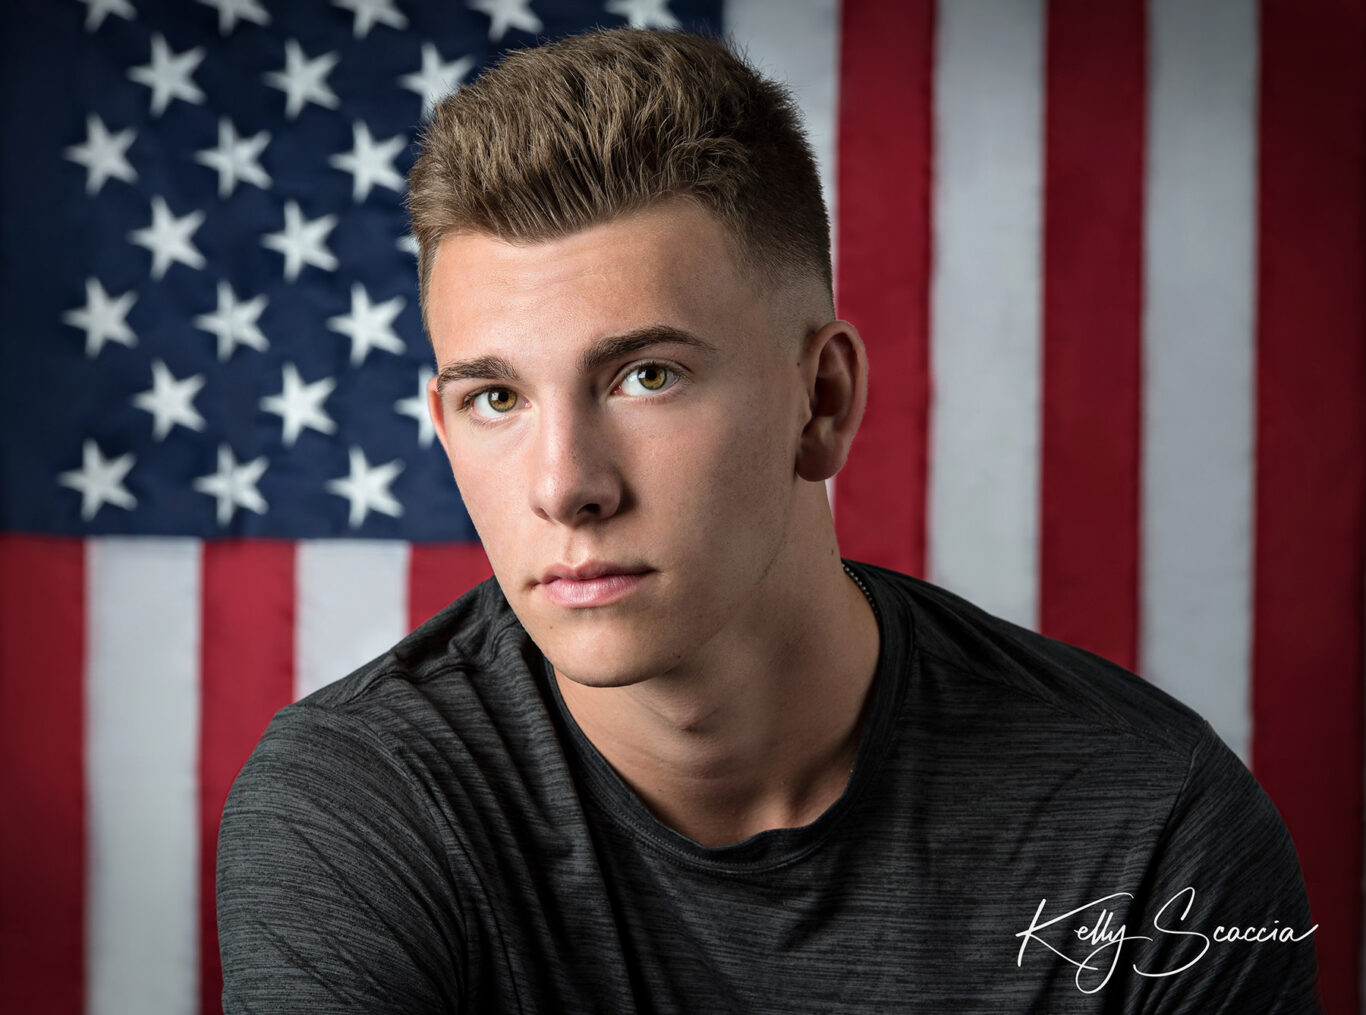 High School senior guy in studio portrait in front of the United States of America flag